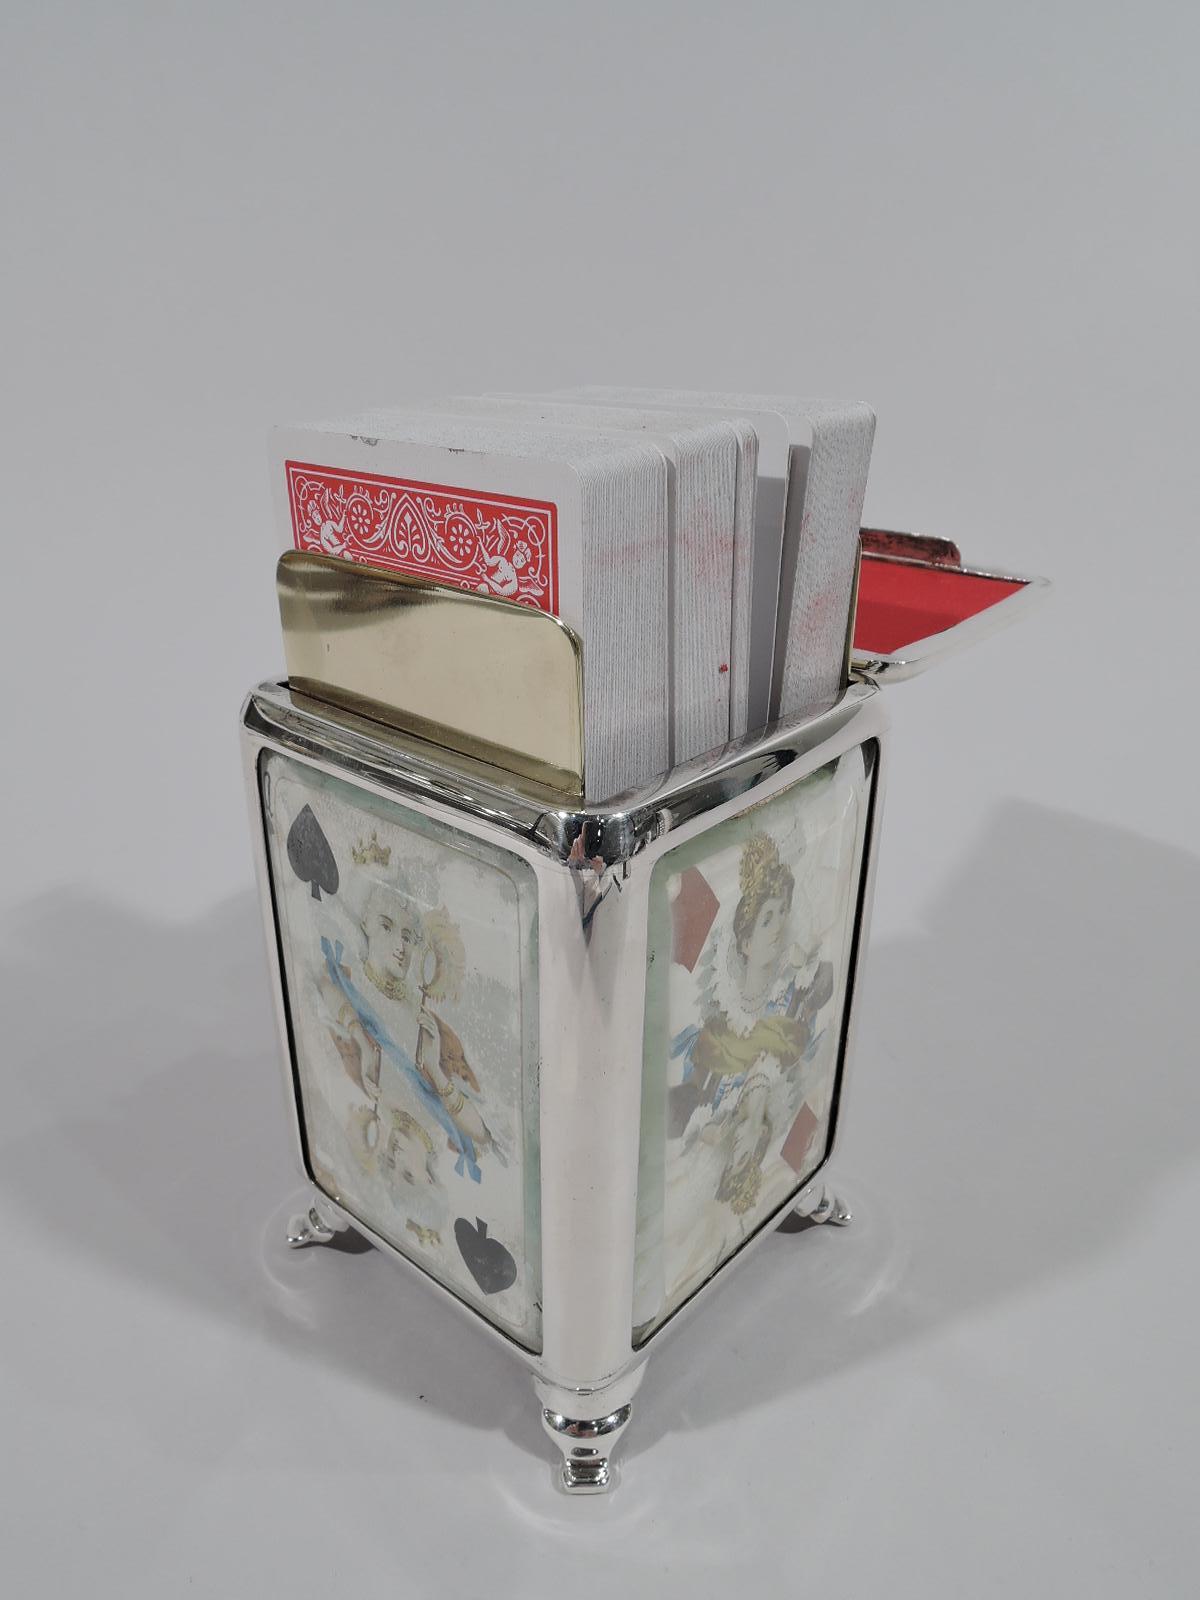 Edwardian sterling silver playing cards box. Made by Grey & Co. in London in 1902. Rectilinear with corner supports. Each side is faced with antique card “royalty” (1 king, 2 queens, and 1 jack), and has beveled glass. Cover hinged with scrolled